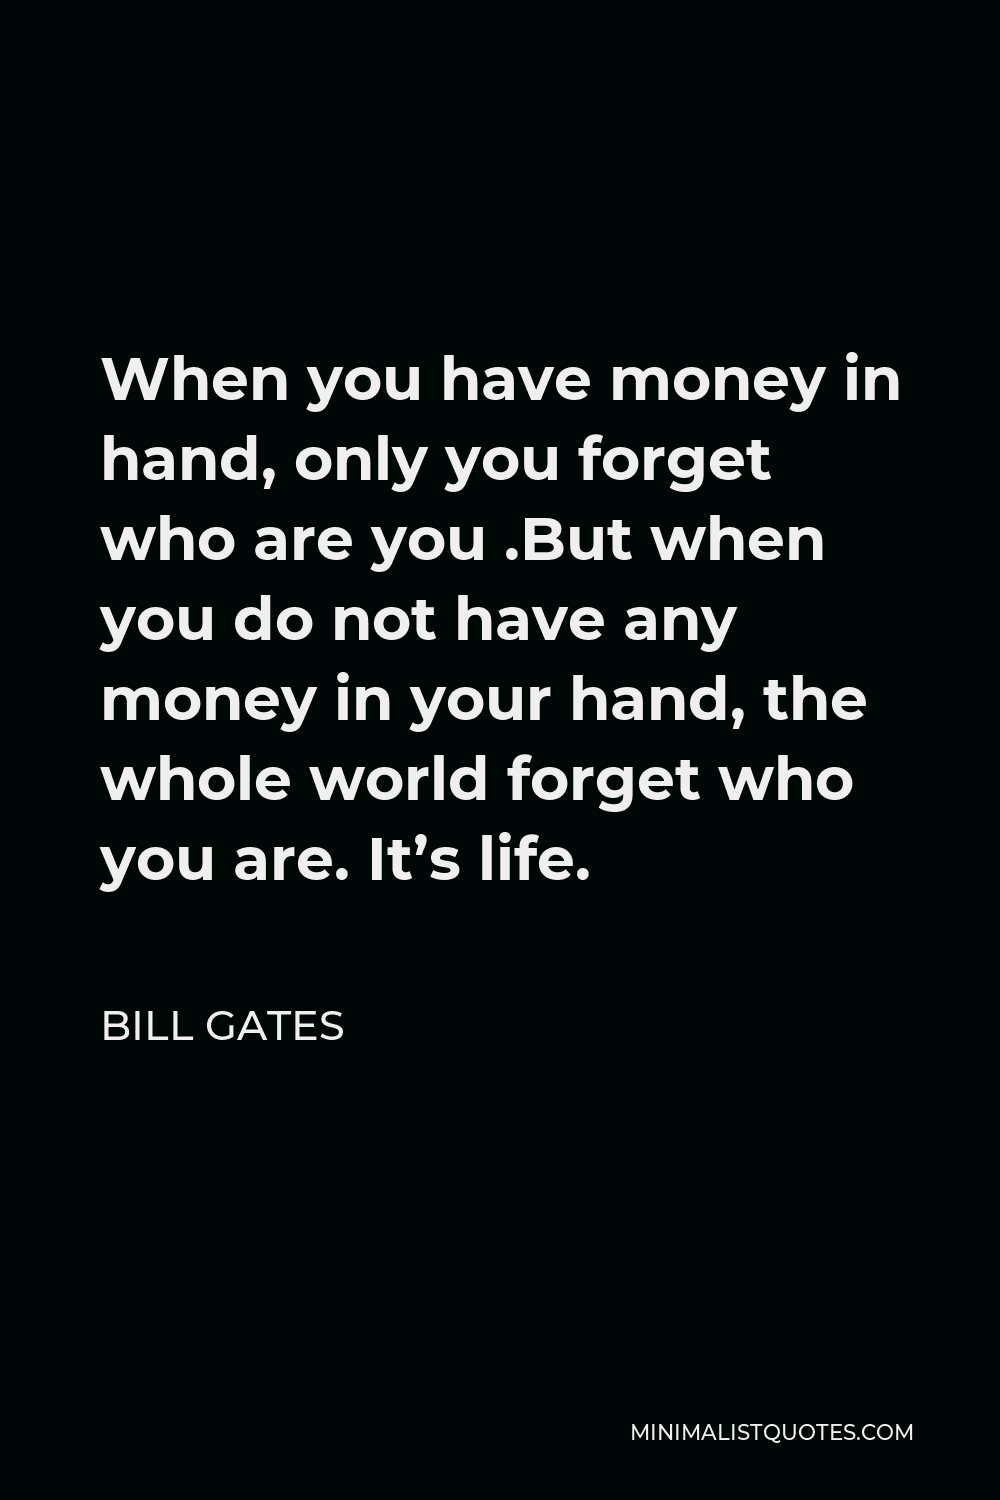 Bill Gates Quotes: When you have money in hand, only you forget who are you .But when you do not have any money in your hand, the whole world forget who you are. It's life.